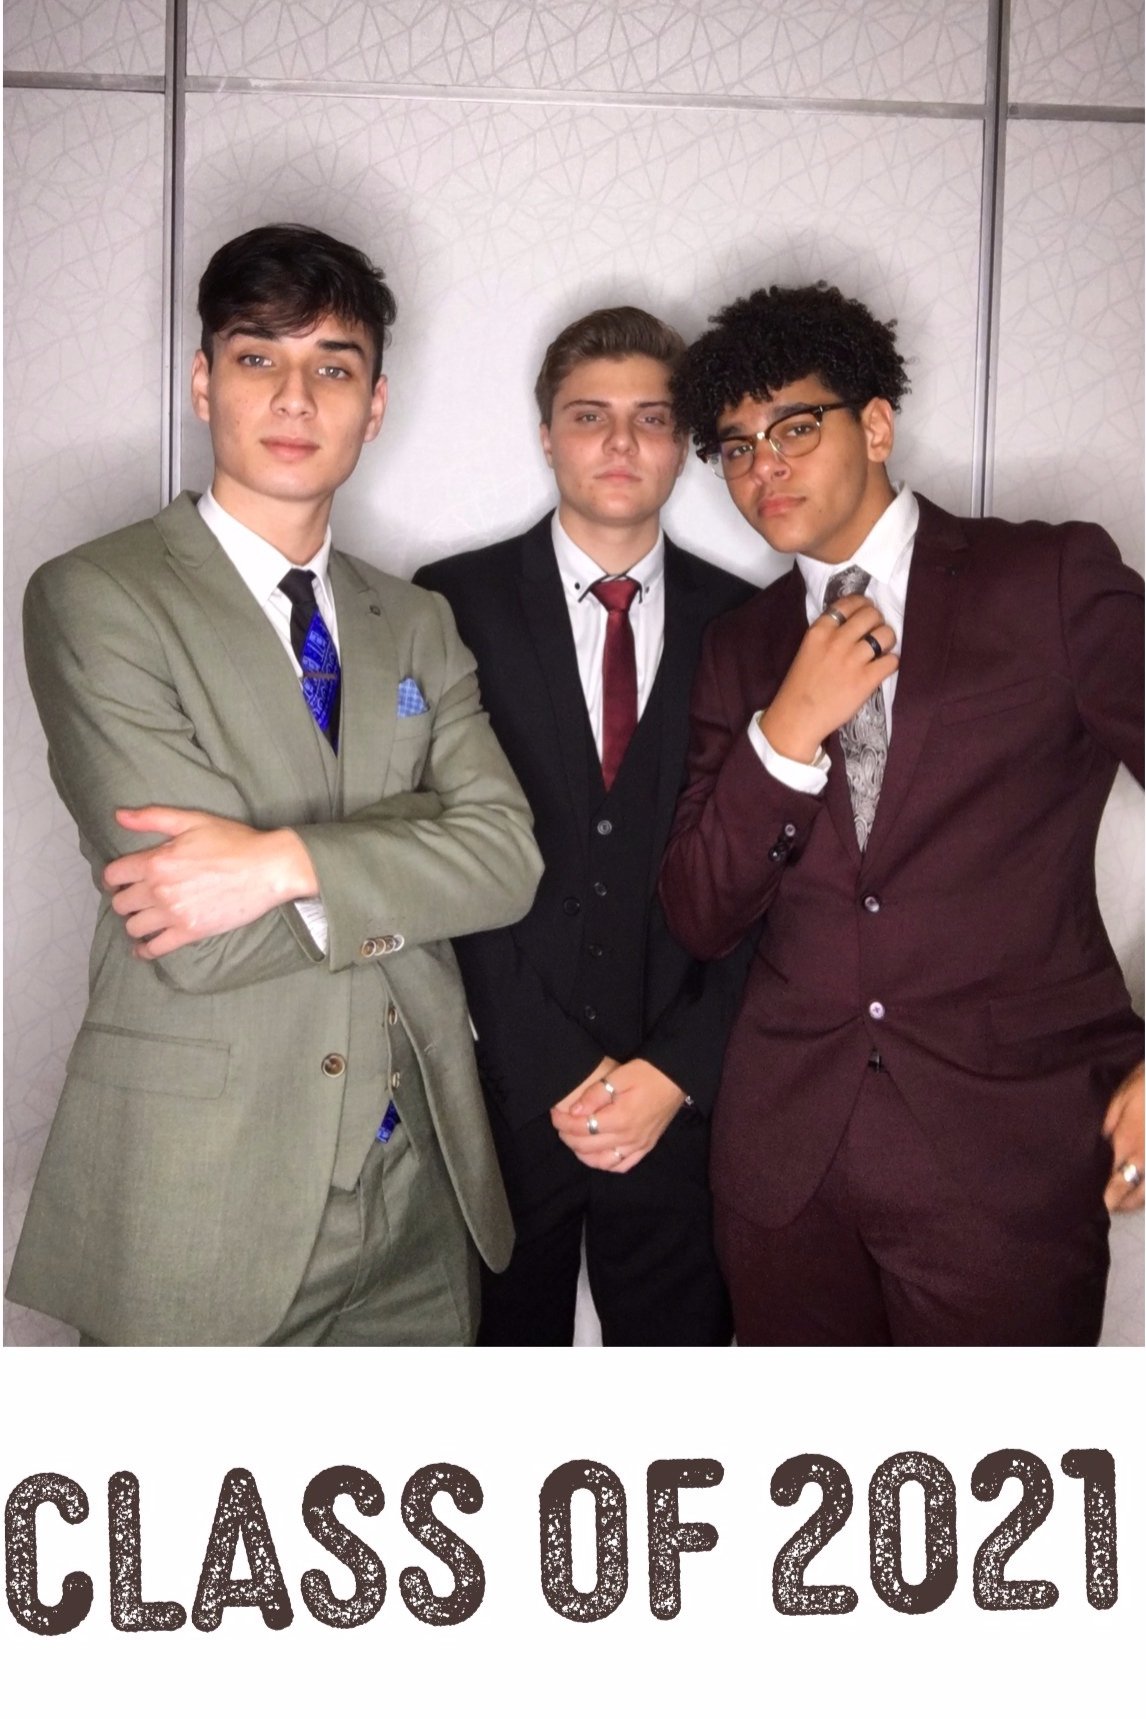 Georges River Grammar (gifbooth) 17/2/22